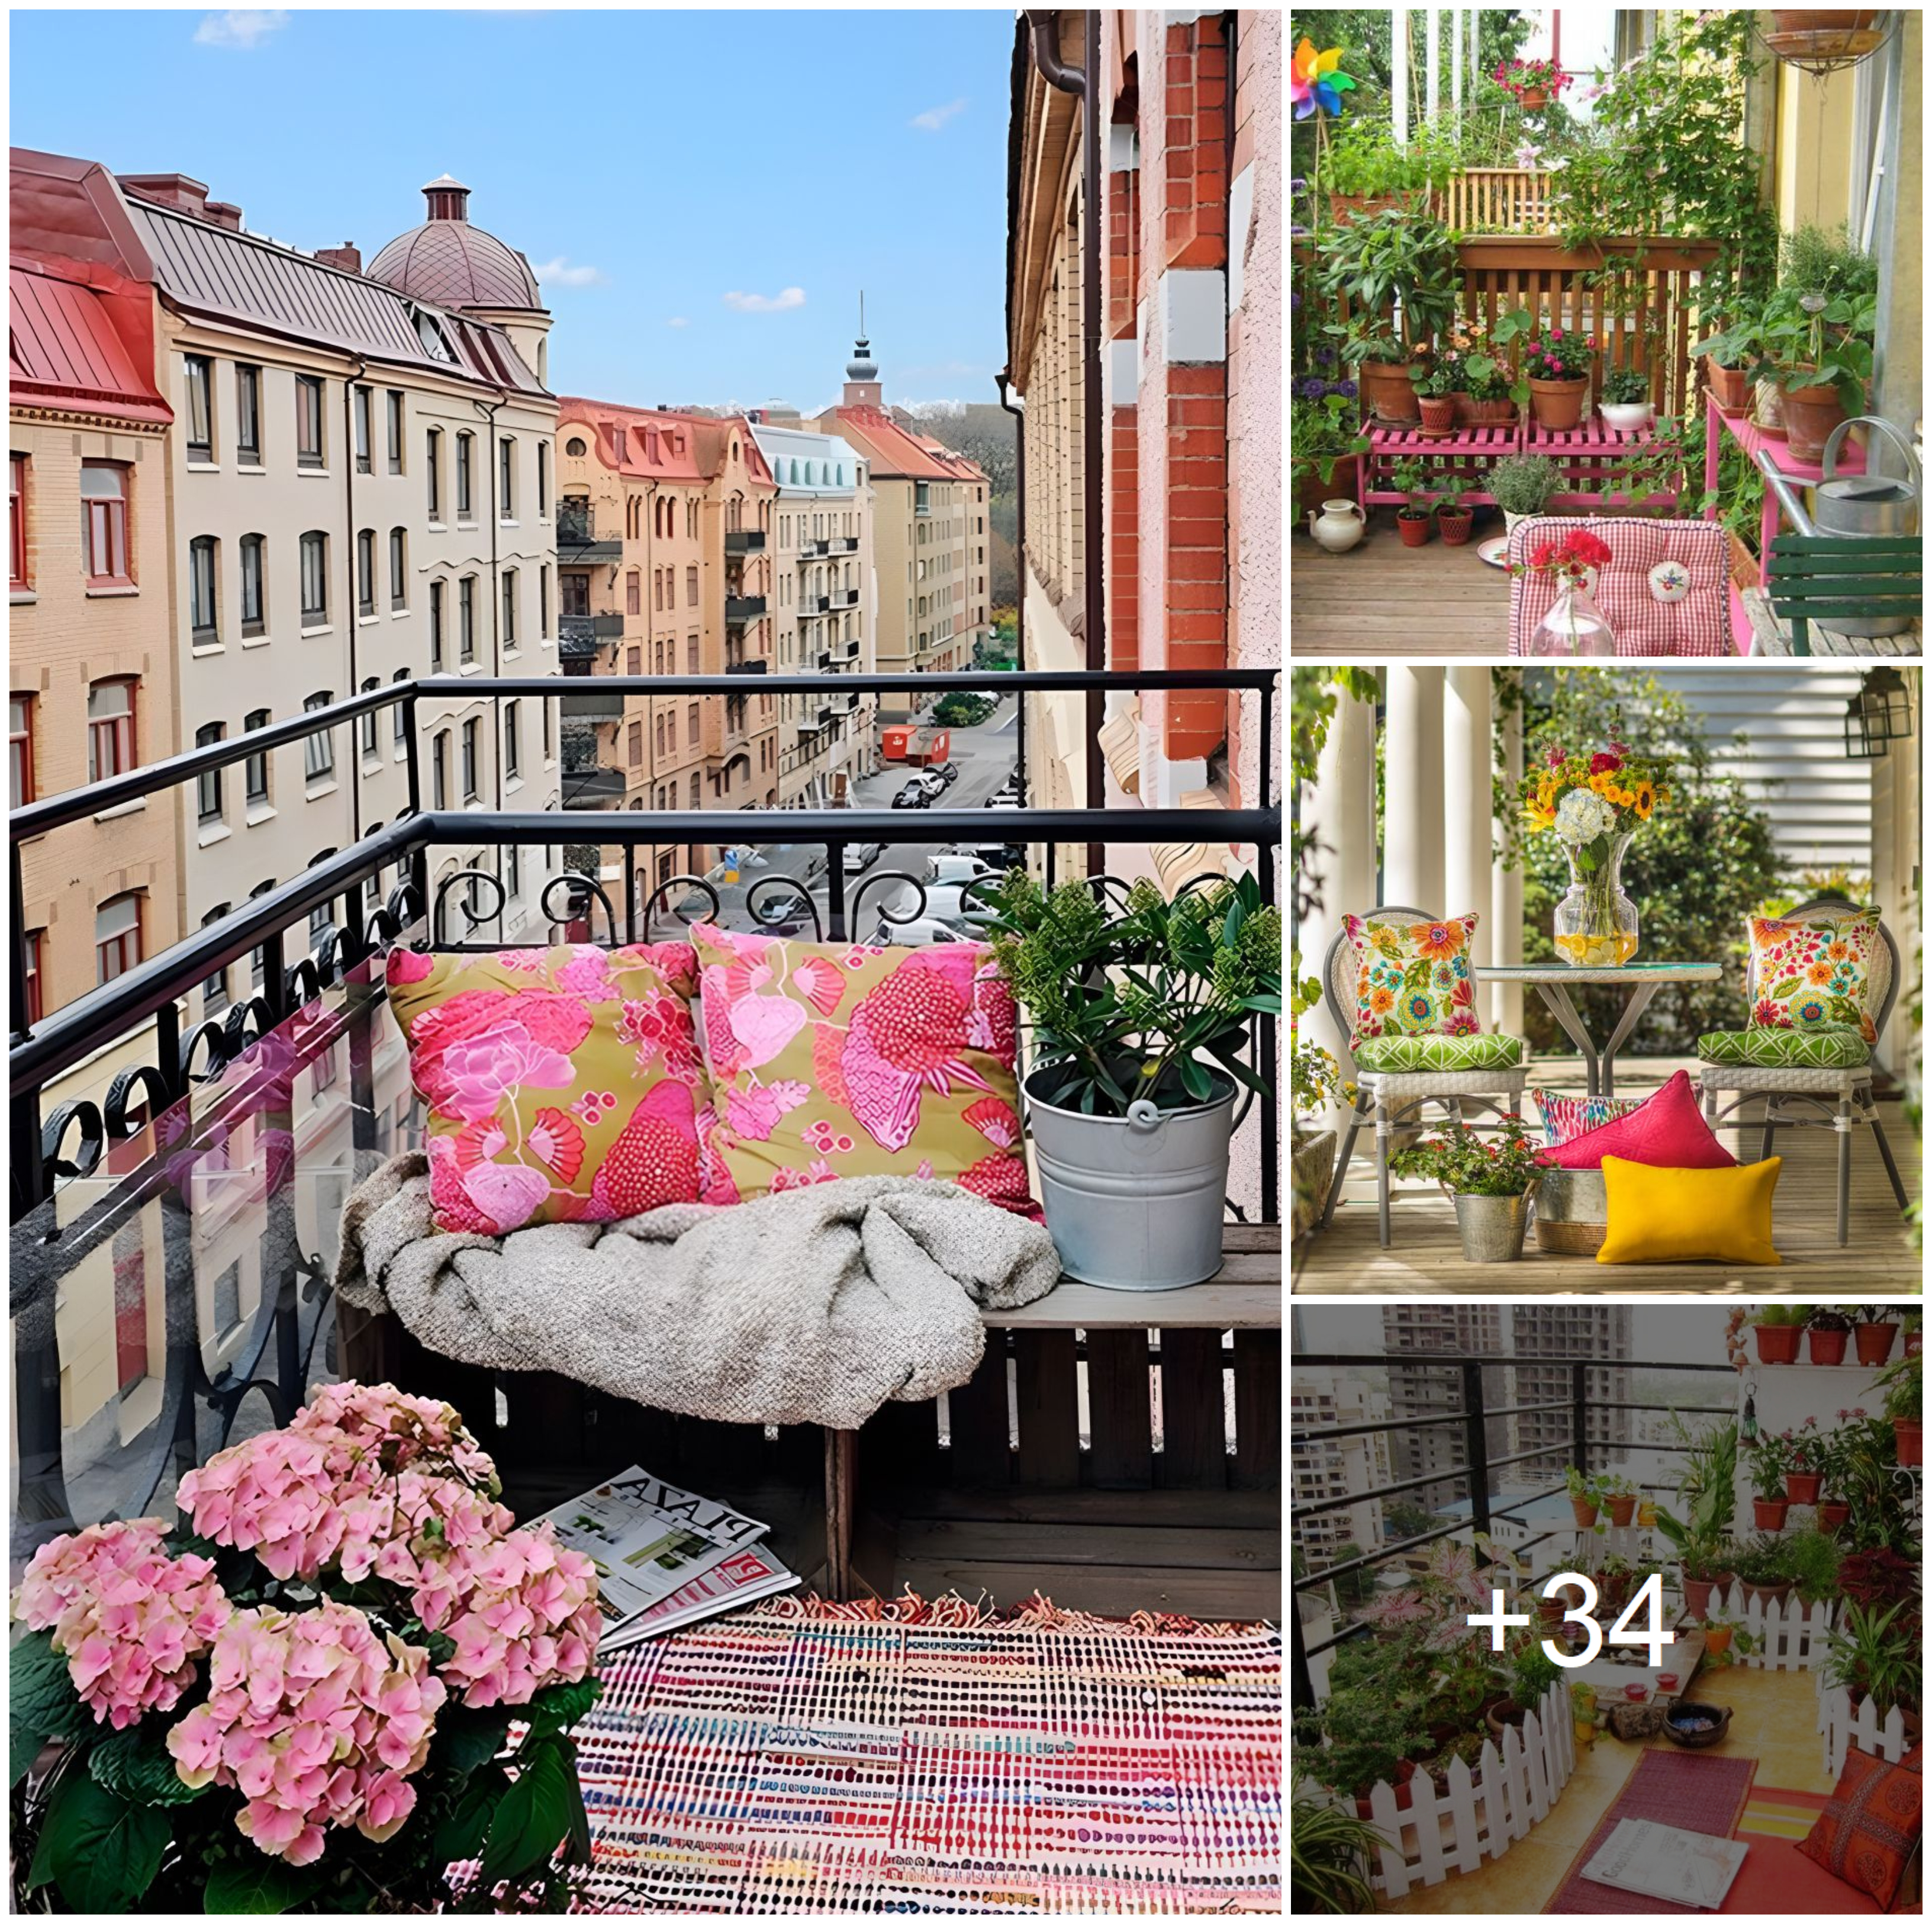 Amazing 34+ Balcony Design Ideas with Flowers and Sunset